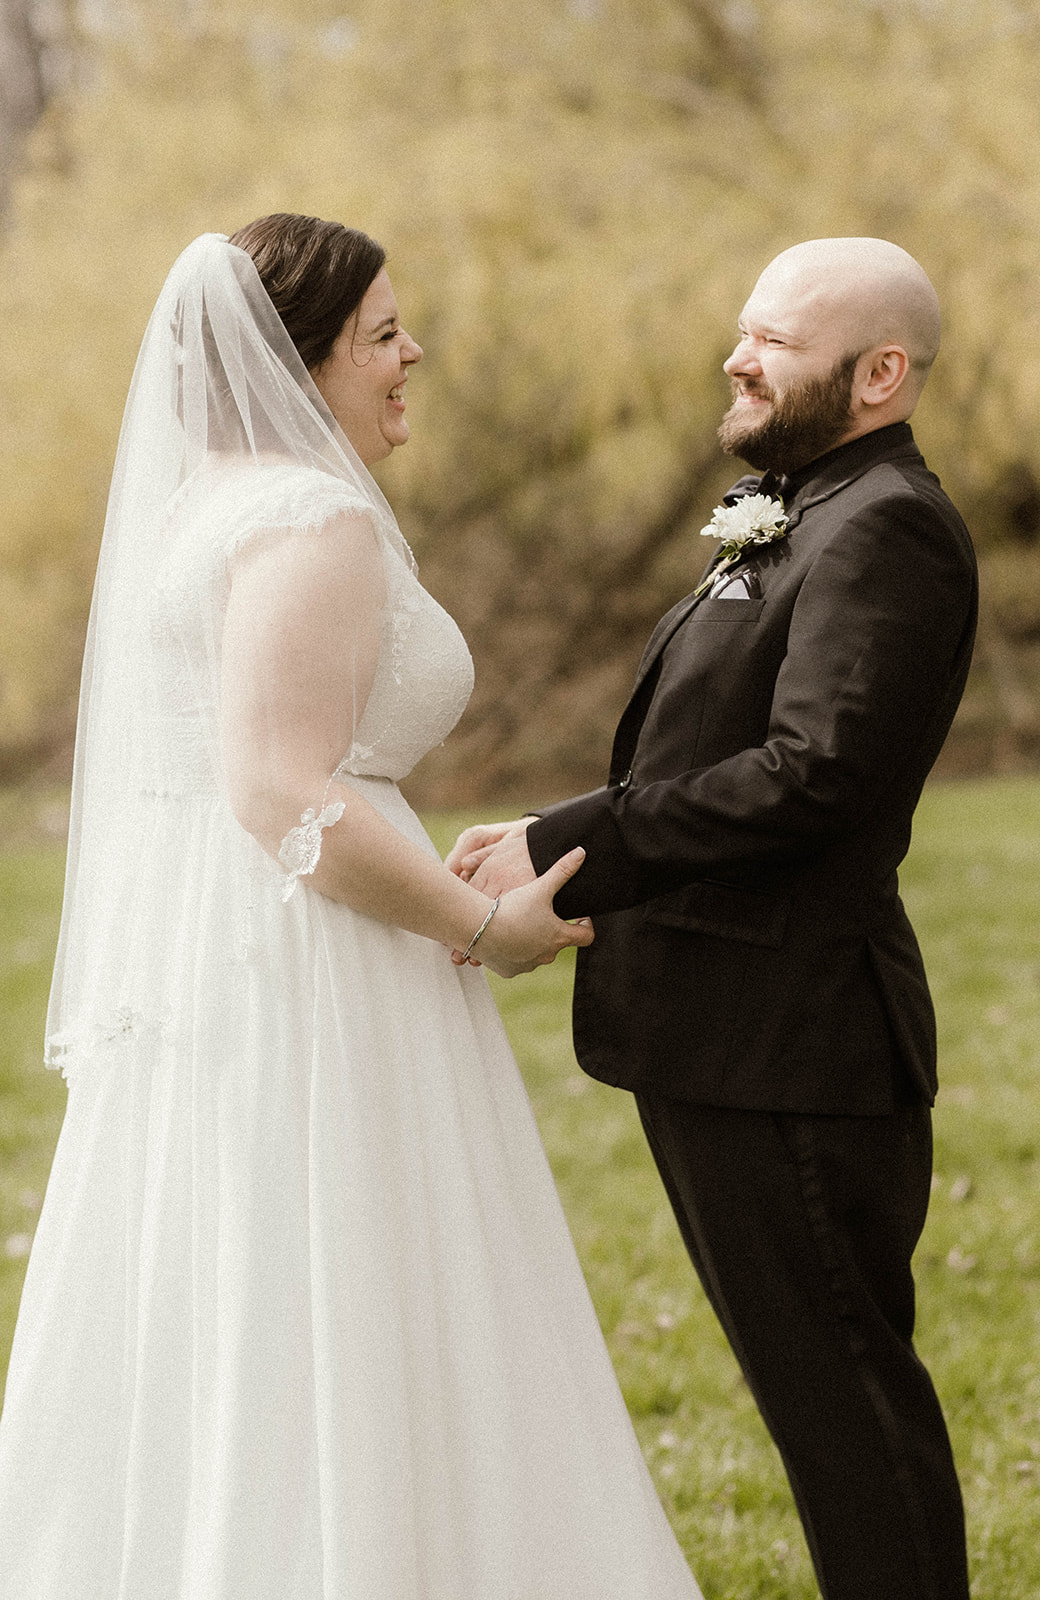 Stunning bride and groom share an intimate moment before their wedding day